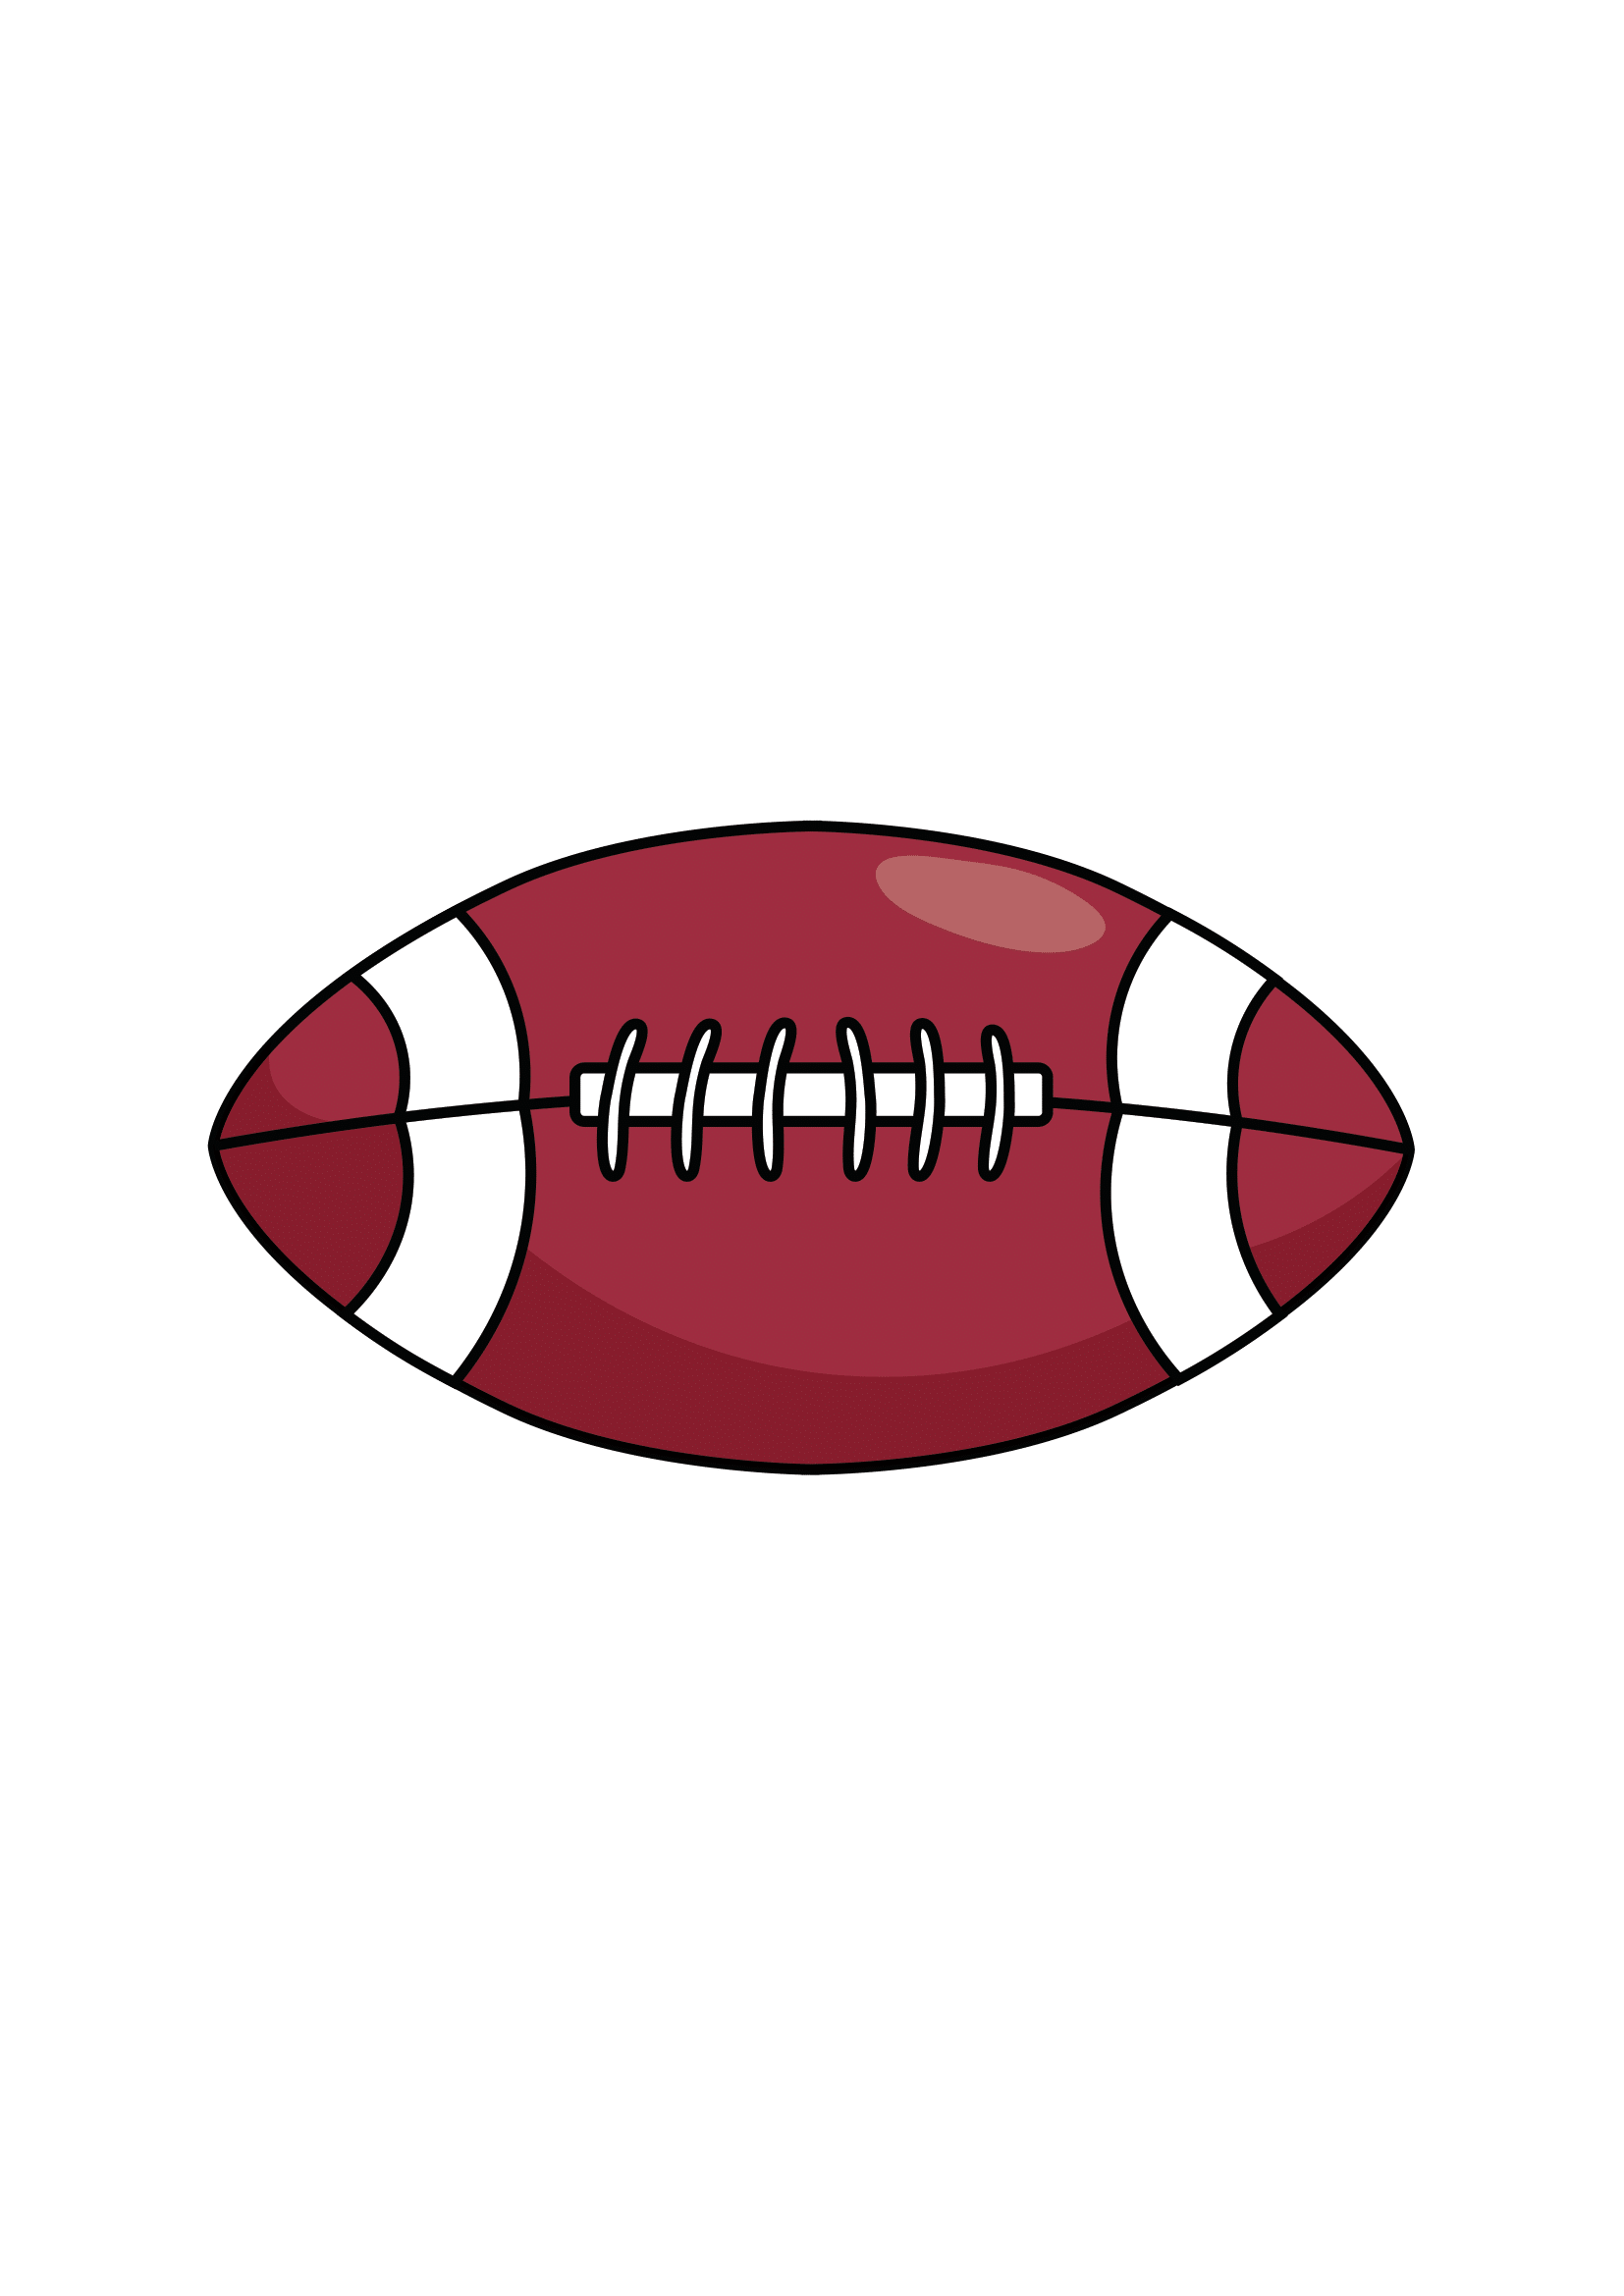 How to Draw A Football Step by Step Printable